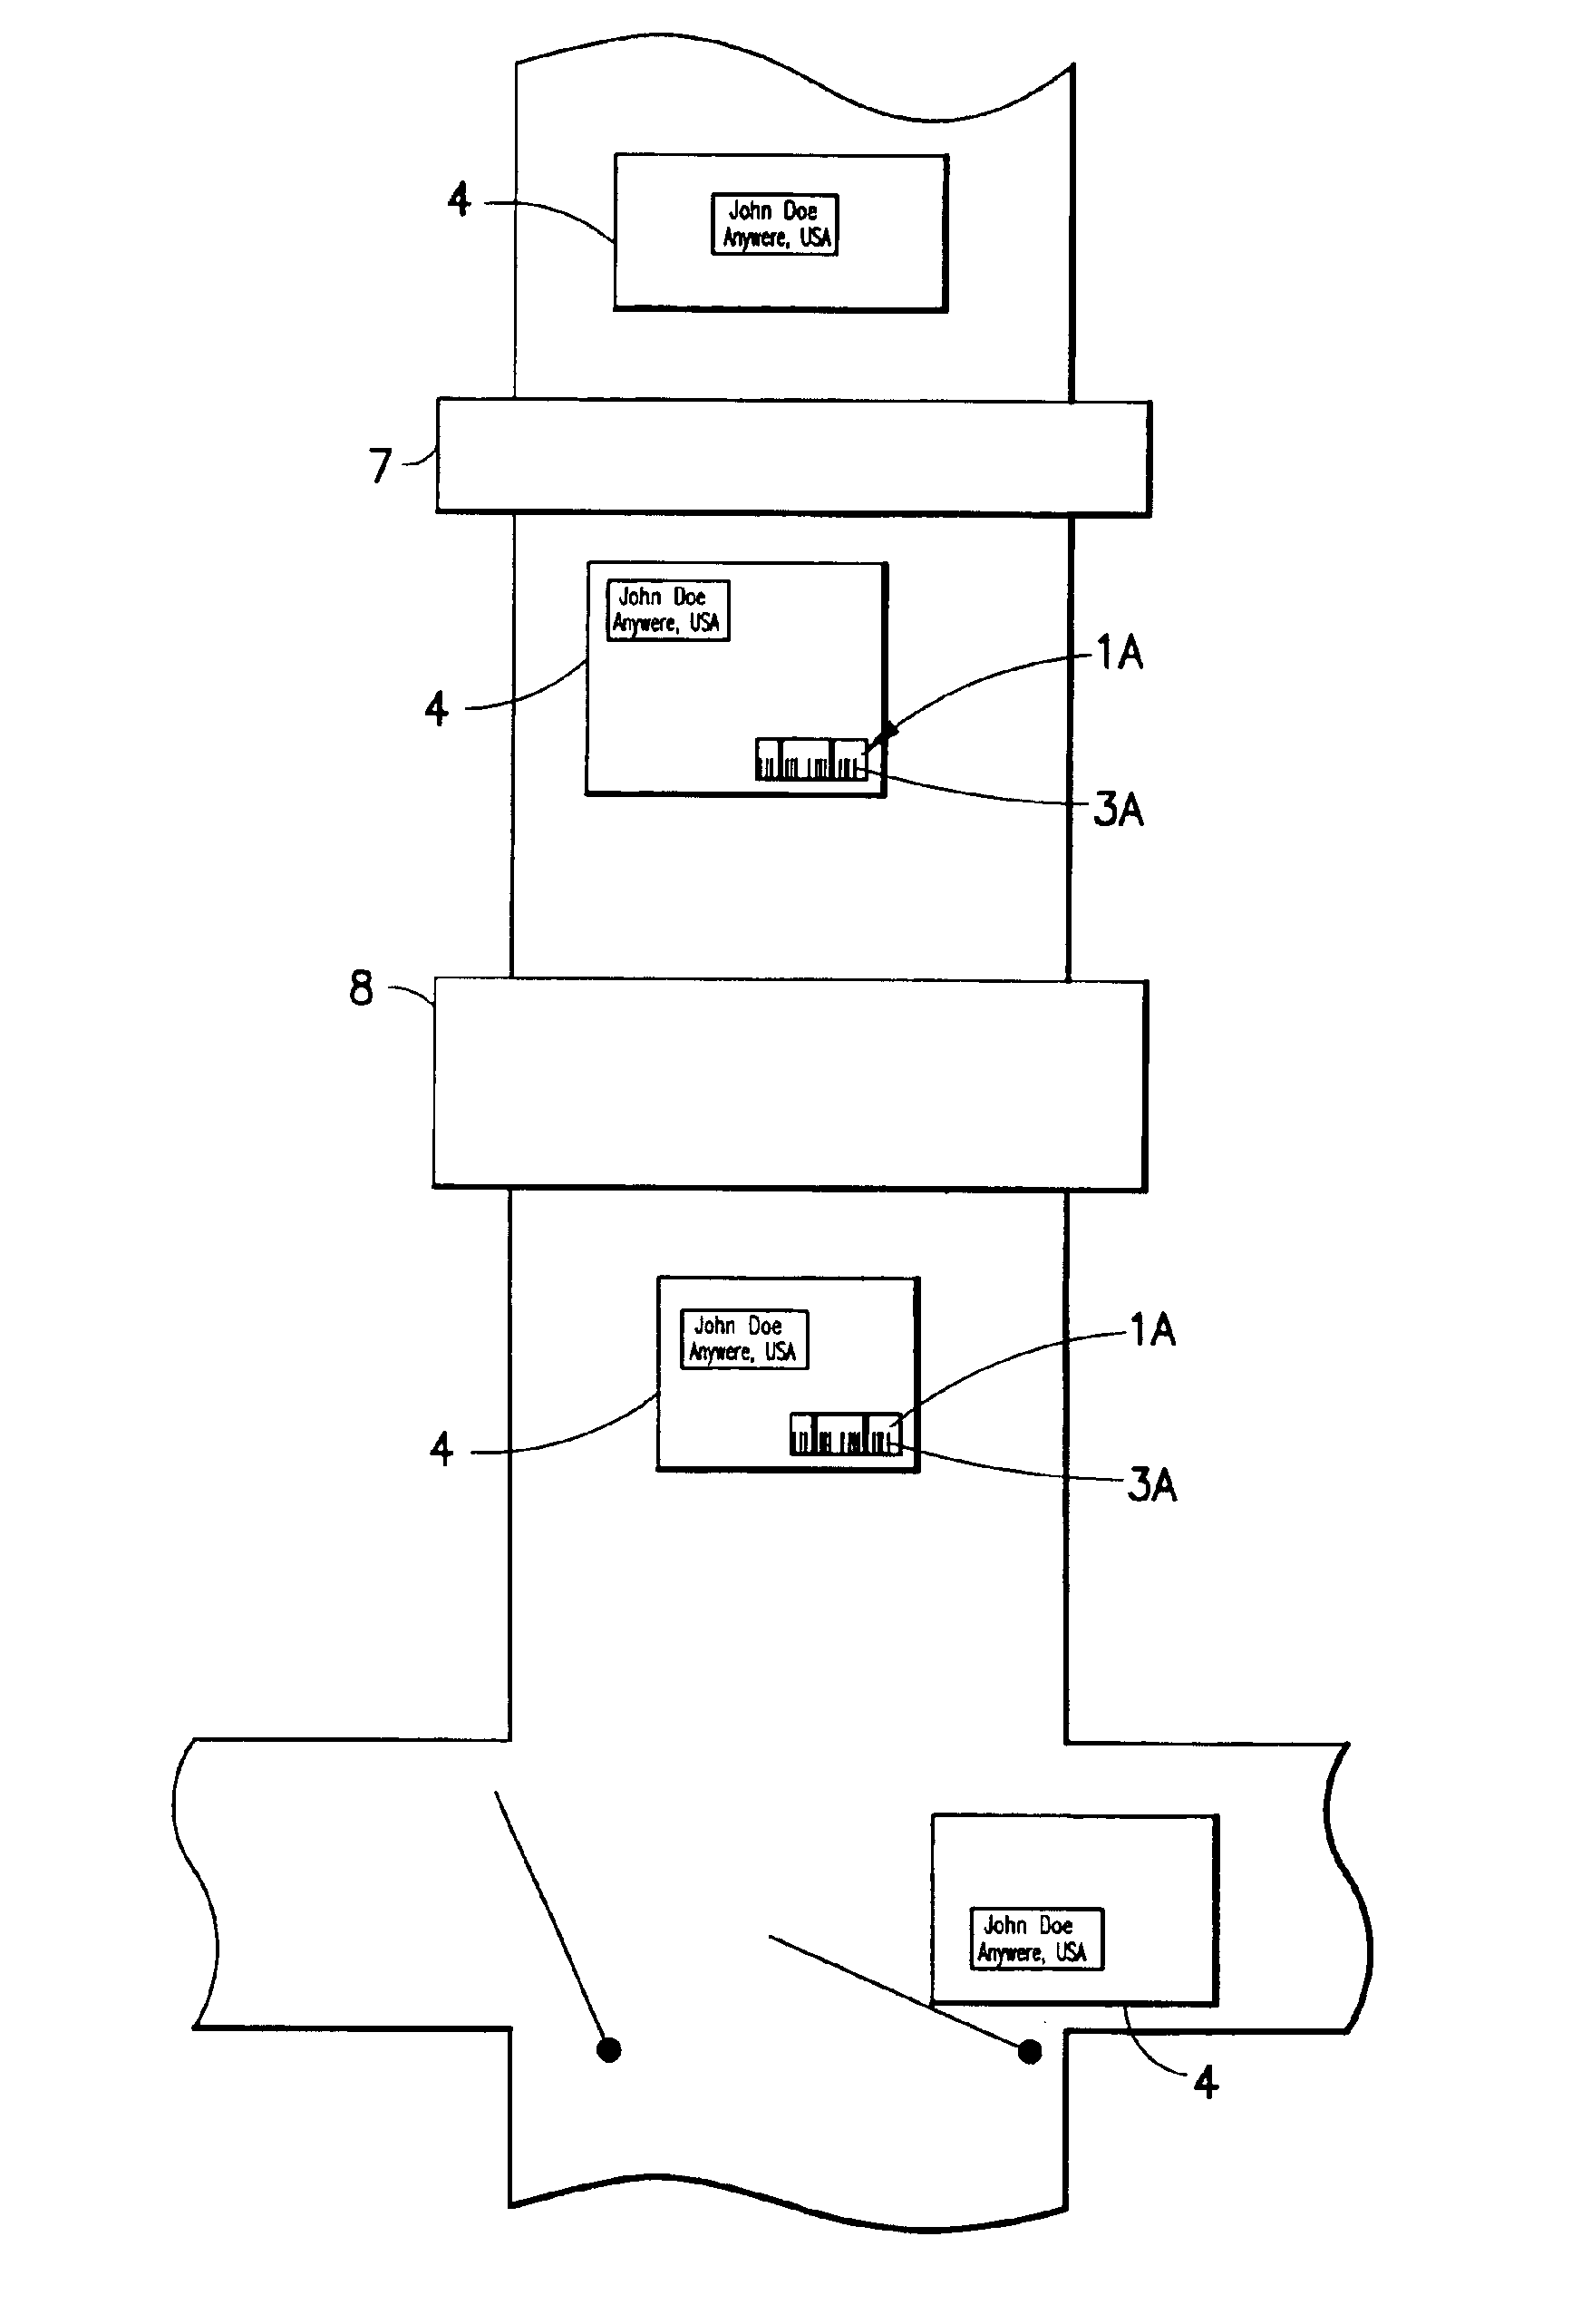 Contrast enhancing marking system for application of unobtrusive identification and other markings